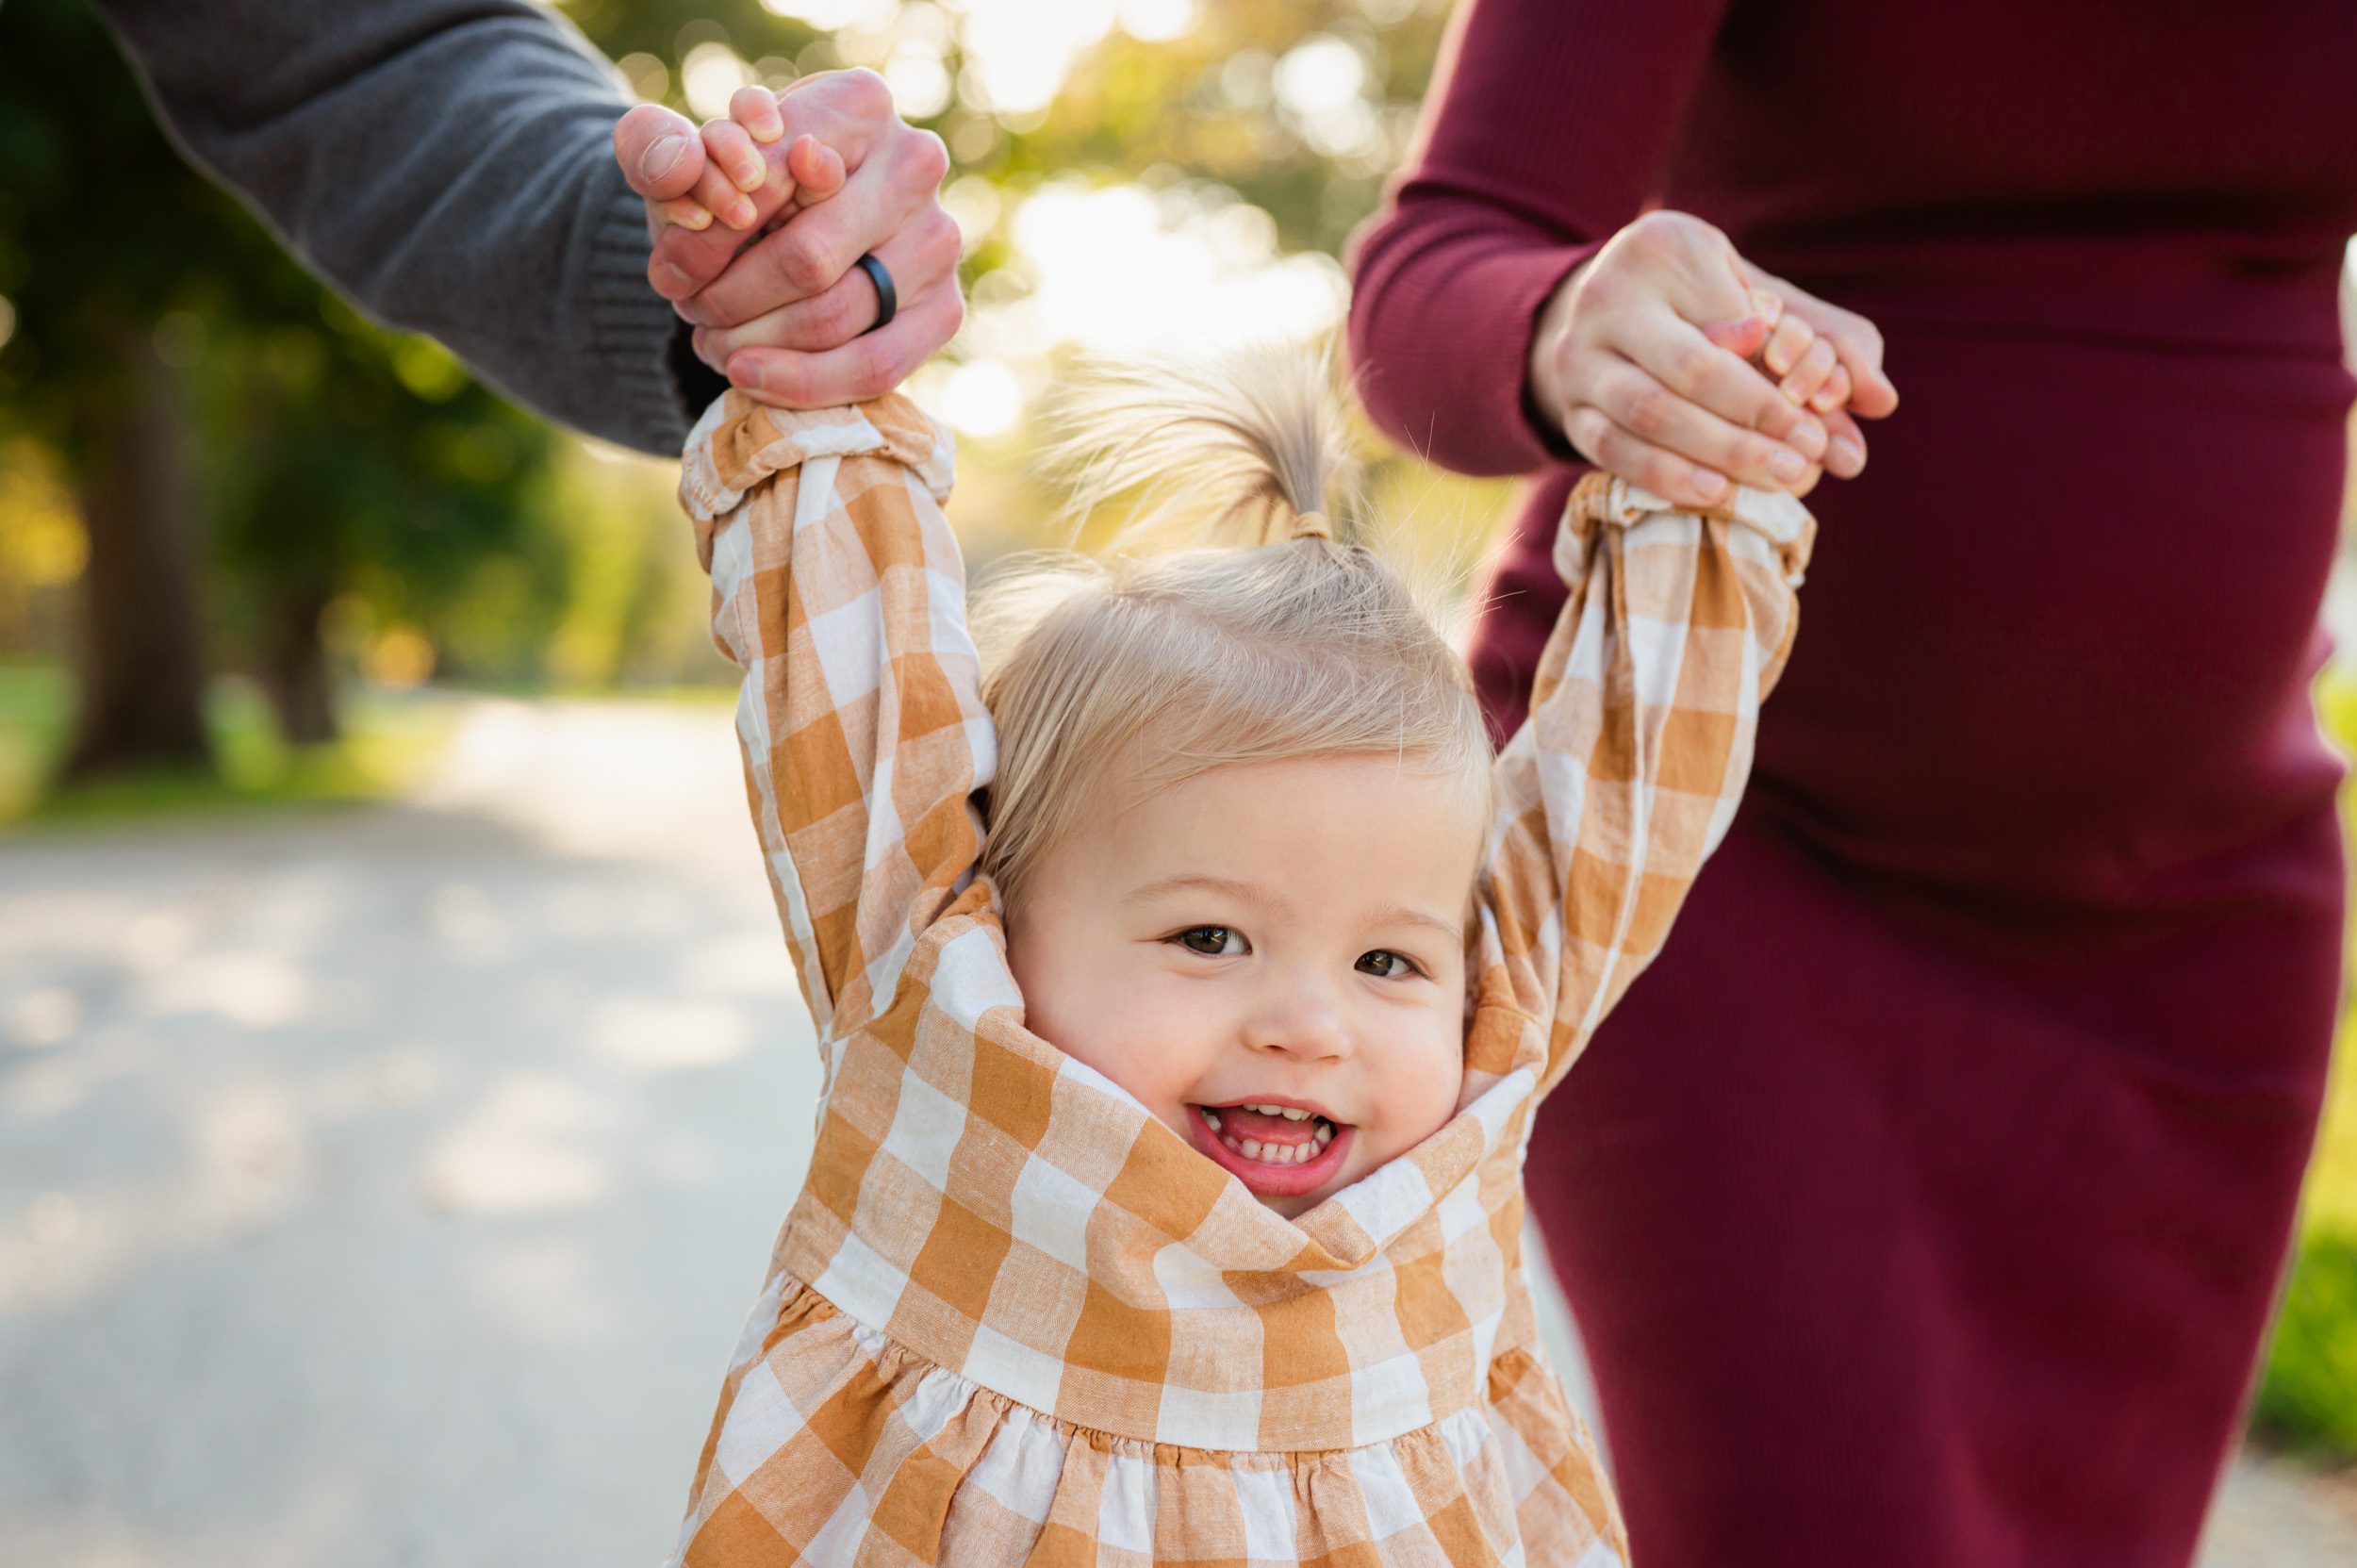 a close up picture of a young girl smiling at the camera as her parents hold her hands and swing her up in the air during a maternity photo session